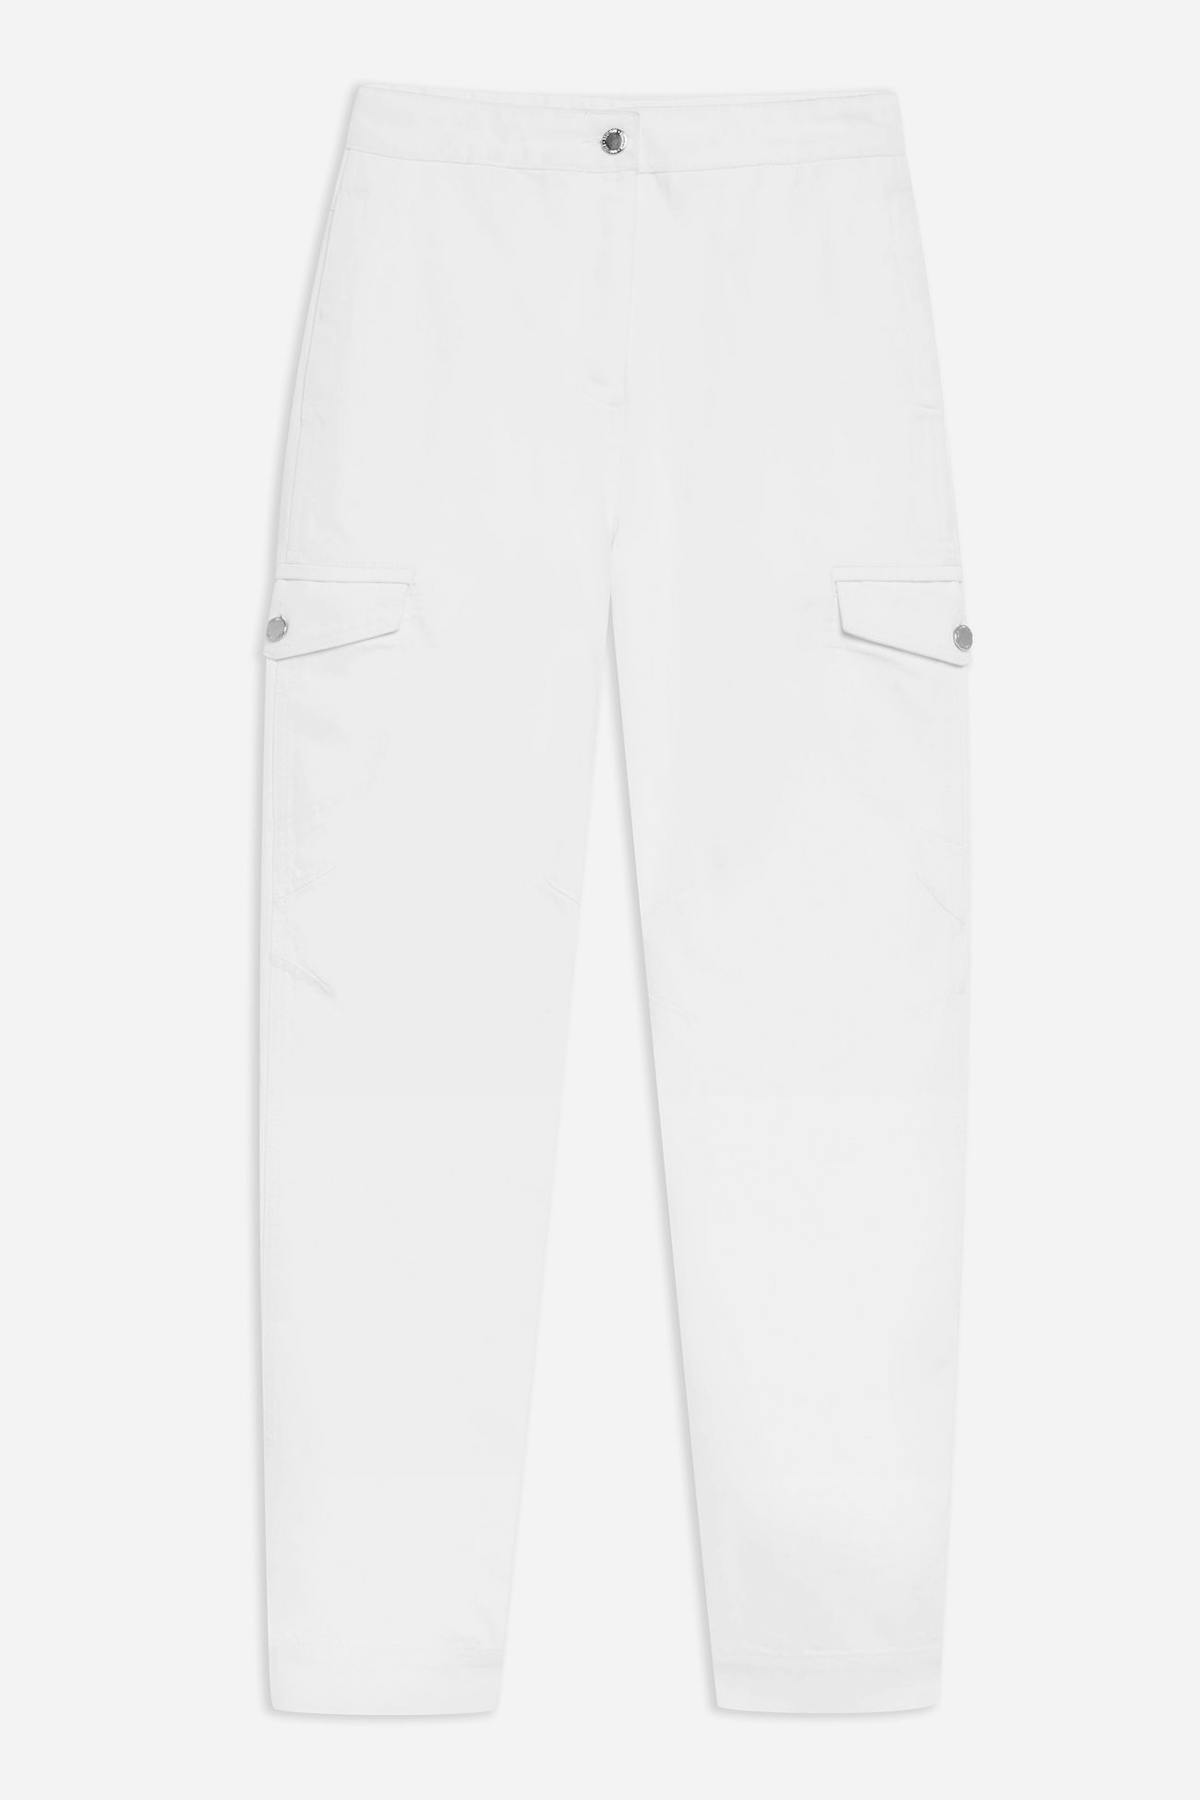 Shopping: How to wear white jeans